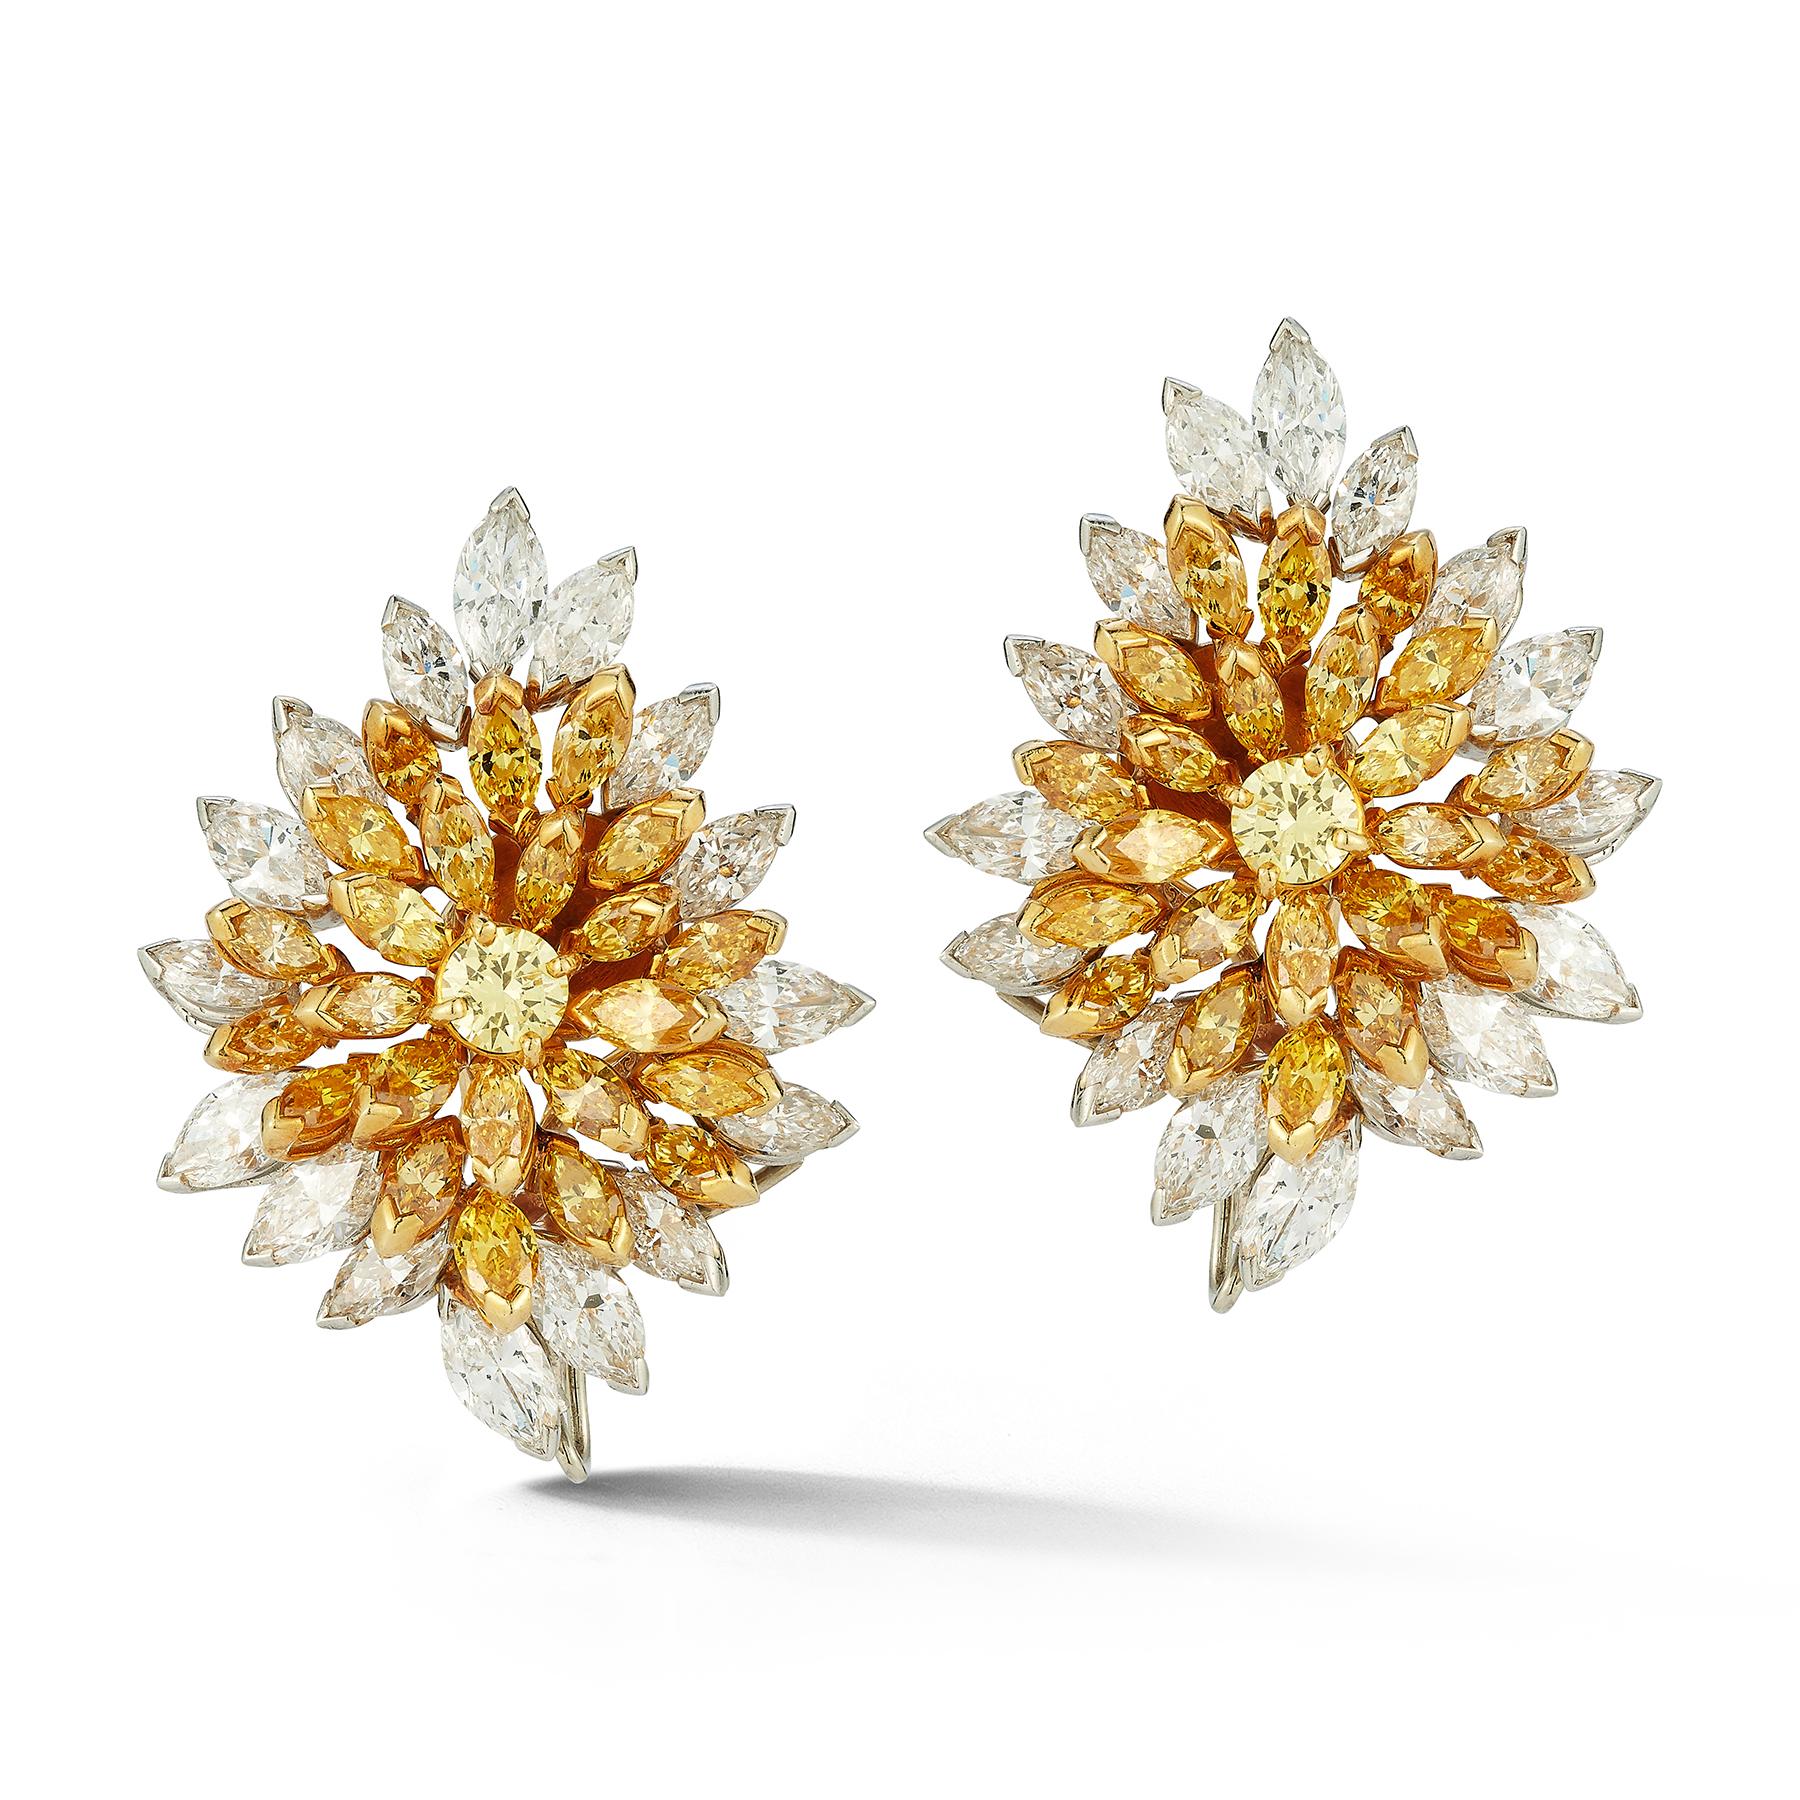 Van Cleef & Arpels Multicolor Diamond Earrings

A pair of 18 karat two tone gold earrings each set with a round cut yellow diamond in the center of a cluster of a marquise cut yellow diamonds all framed by marquise cut white diamonds

Signed VCA NY